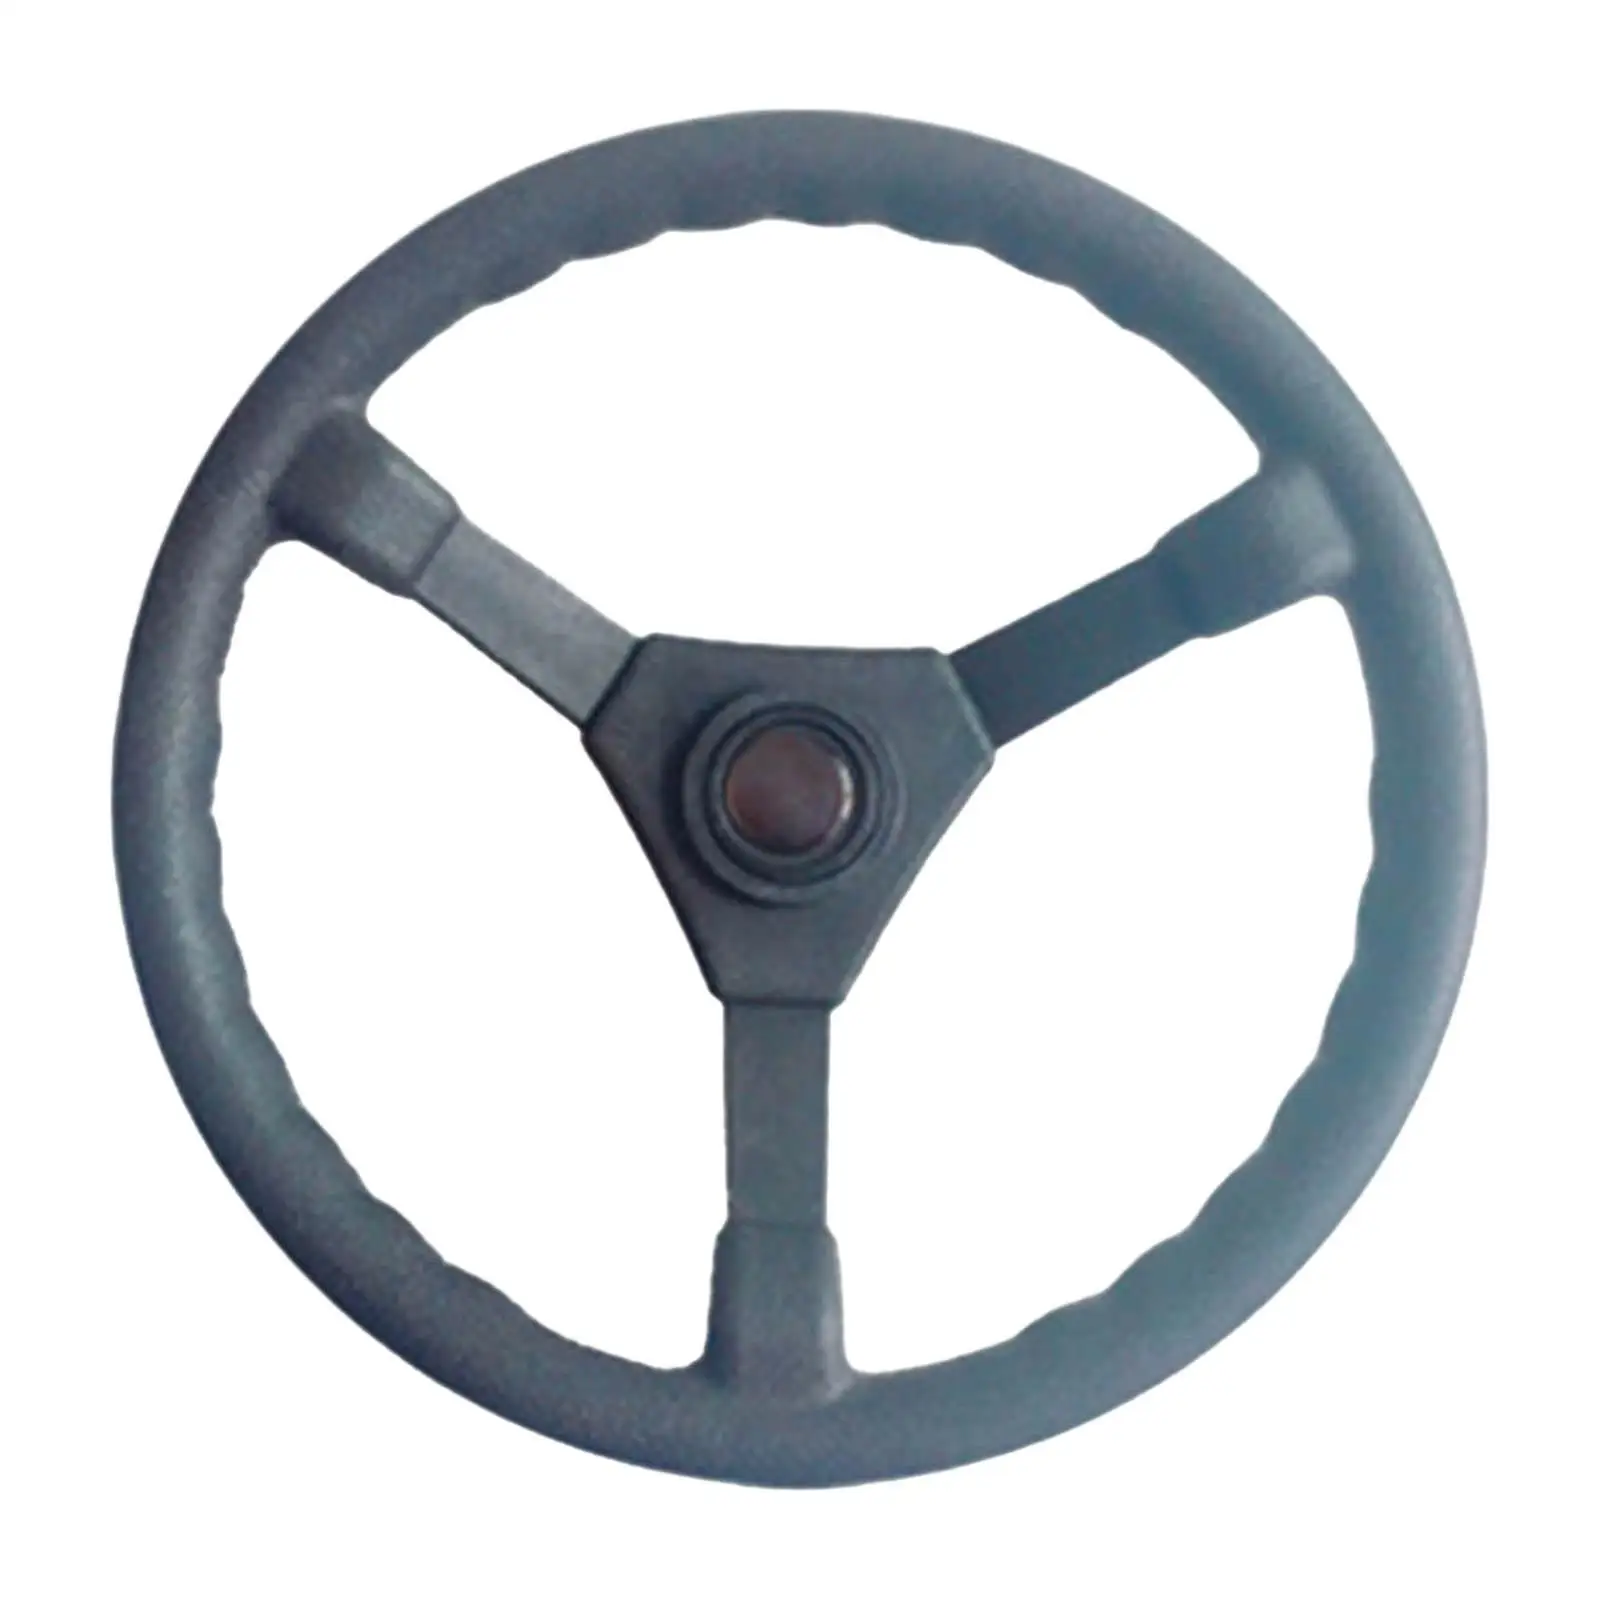 Boat Steering Wheel Replace Outboard Steering System Control for Marine